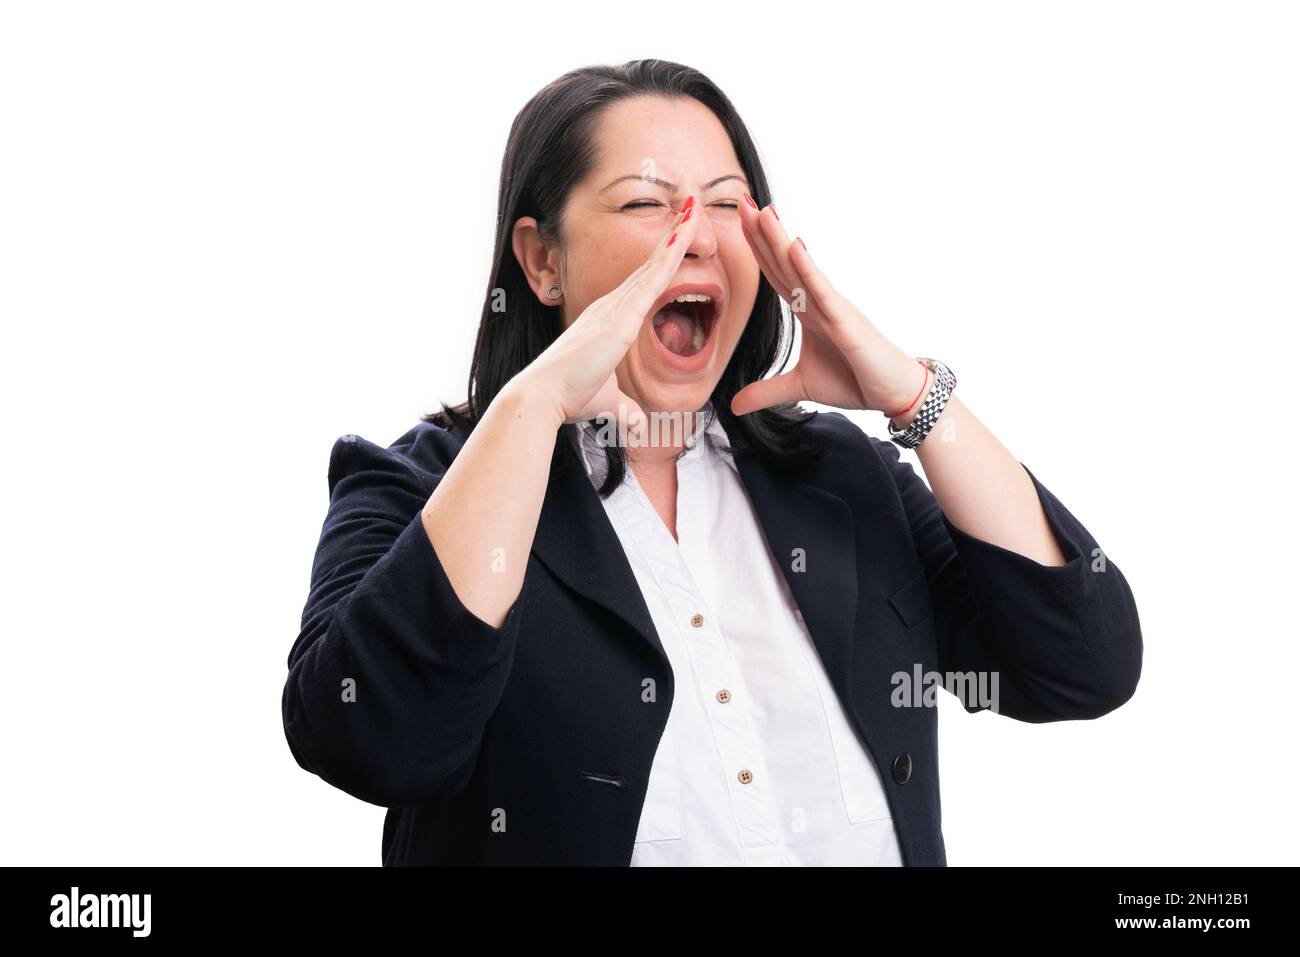 Adult entrepreneur woman model making shouting gesture using hands around mouth with blank copyspace wearing office clothing isolated on white backgro Stock Photo